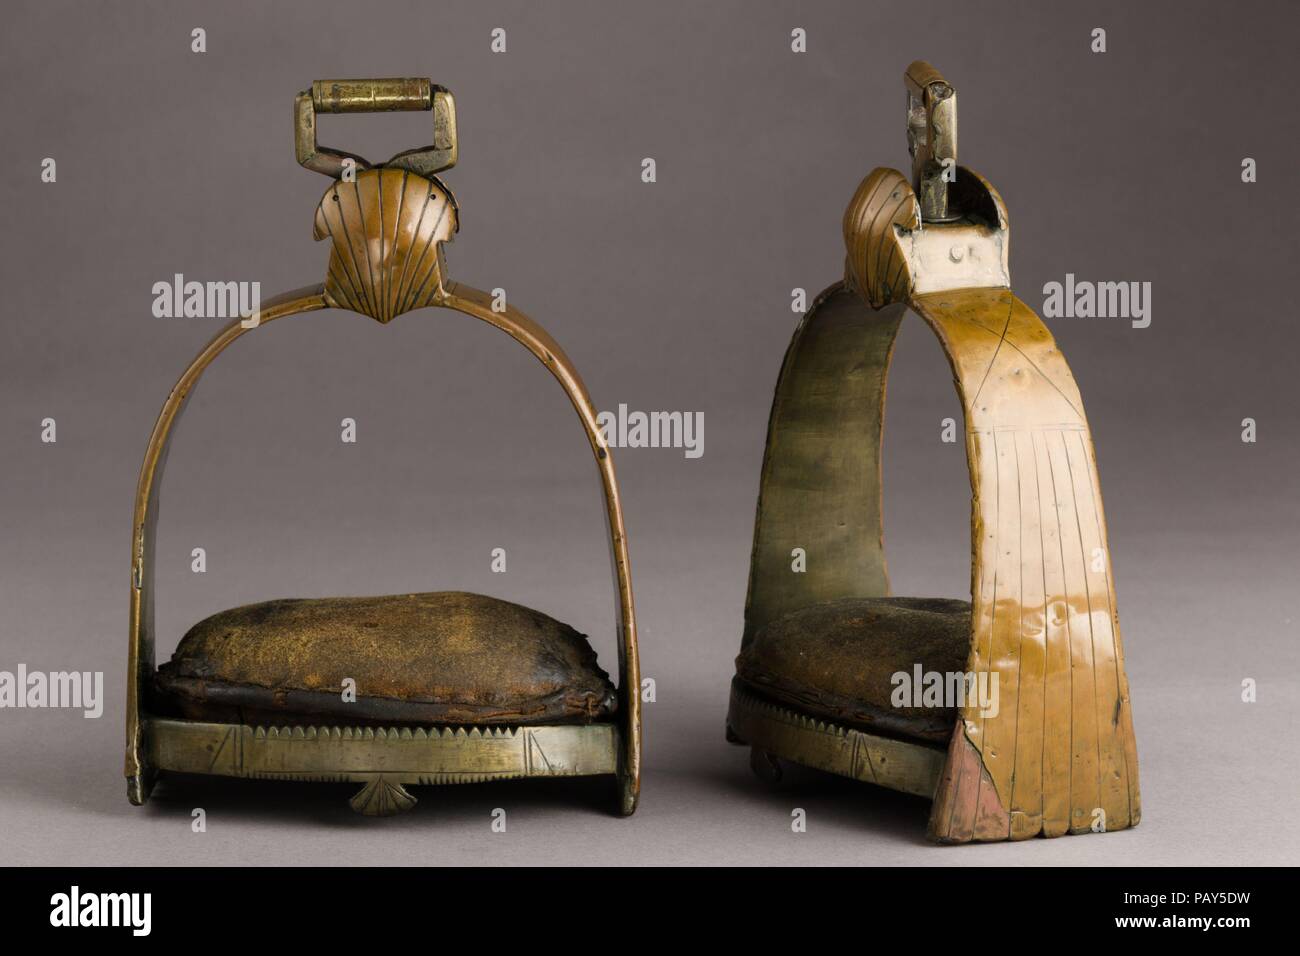 Pair of Stirrups. Culture: German. Dimensions: Stirrup (cc); H. 9 1/4 in. (23.5 cm); W. 6 3/8 in. (16.2 cm); D. 4 3/4 in. (12.1 cm); Wt. 3 lb. 0.5 oz. (1375 g); stirrup (dd); H. 9 1/2 in. (24.1 cm); W. 6 3/8 in. (16.2 cm); D. 4 1/2 in. (11.4 cm); Wt. 2 lb. 13.3 oz. (1284.2 g). Date: 17th century.  The large size of these stirrups is unusual for the period. They may have been used by a postilion, a driver riding one of the carriage horses. However stirrups for this purpose typically had simpler designs. Indeed, to prevent their legs being crushed between the two horses or the central wooden sha Stock Photo